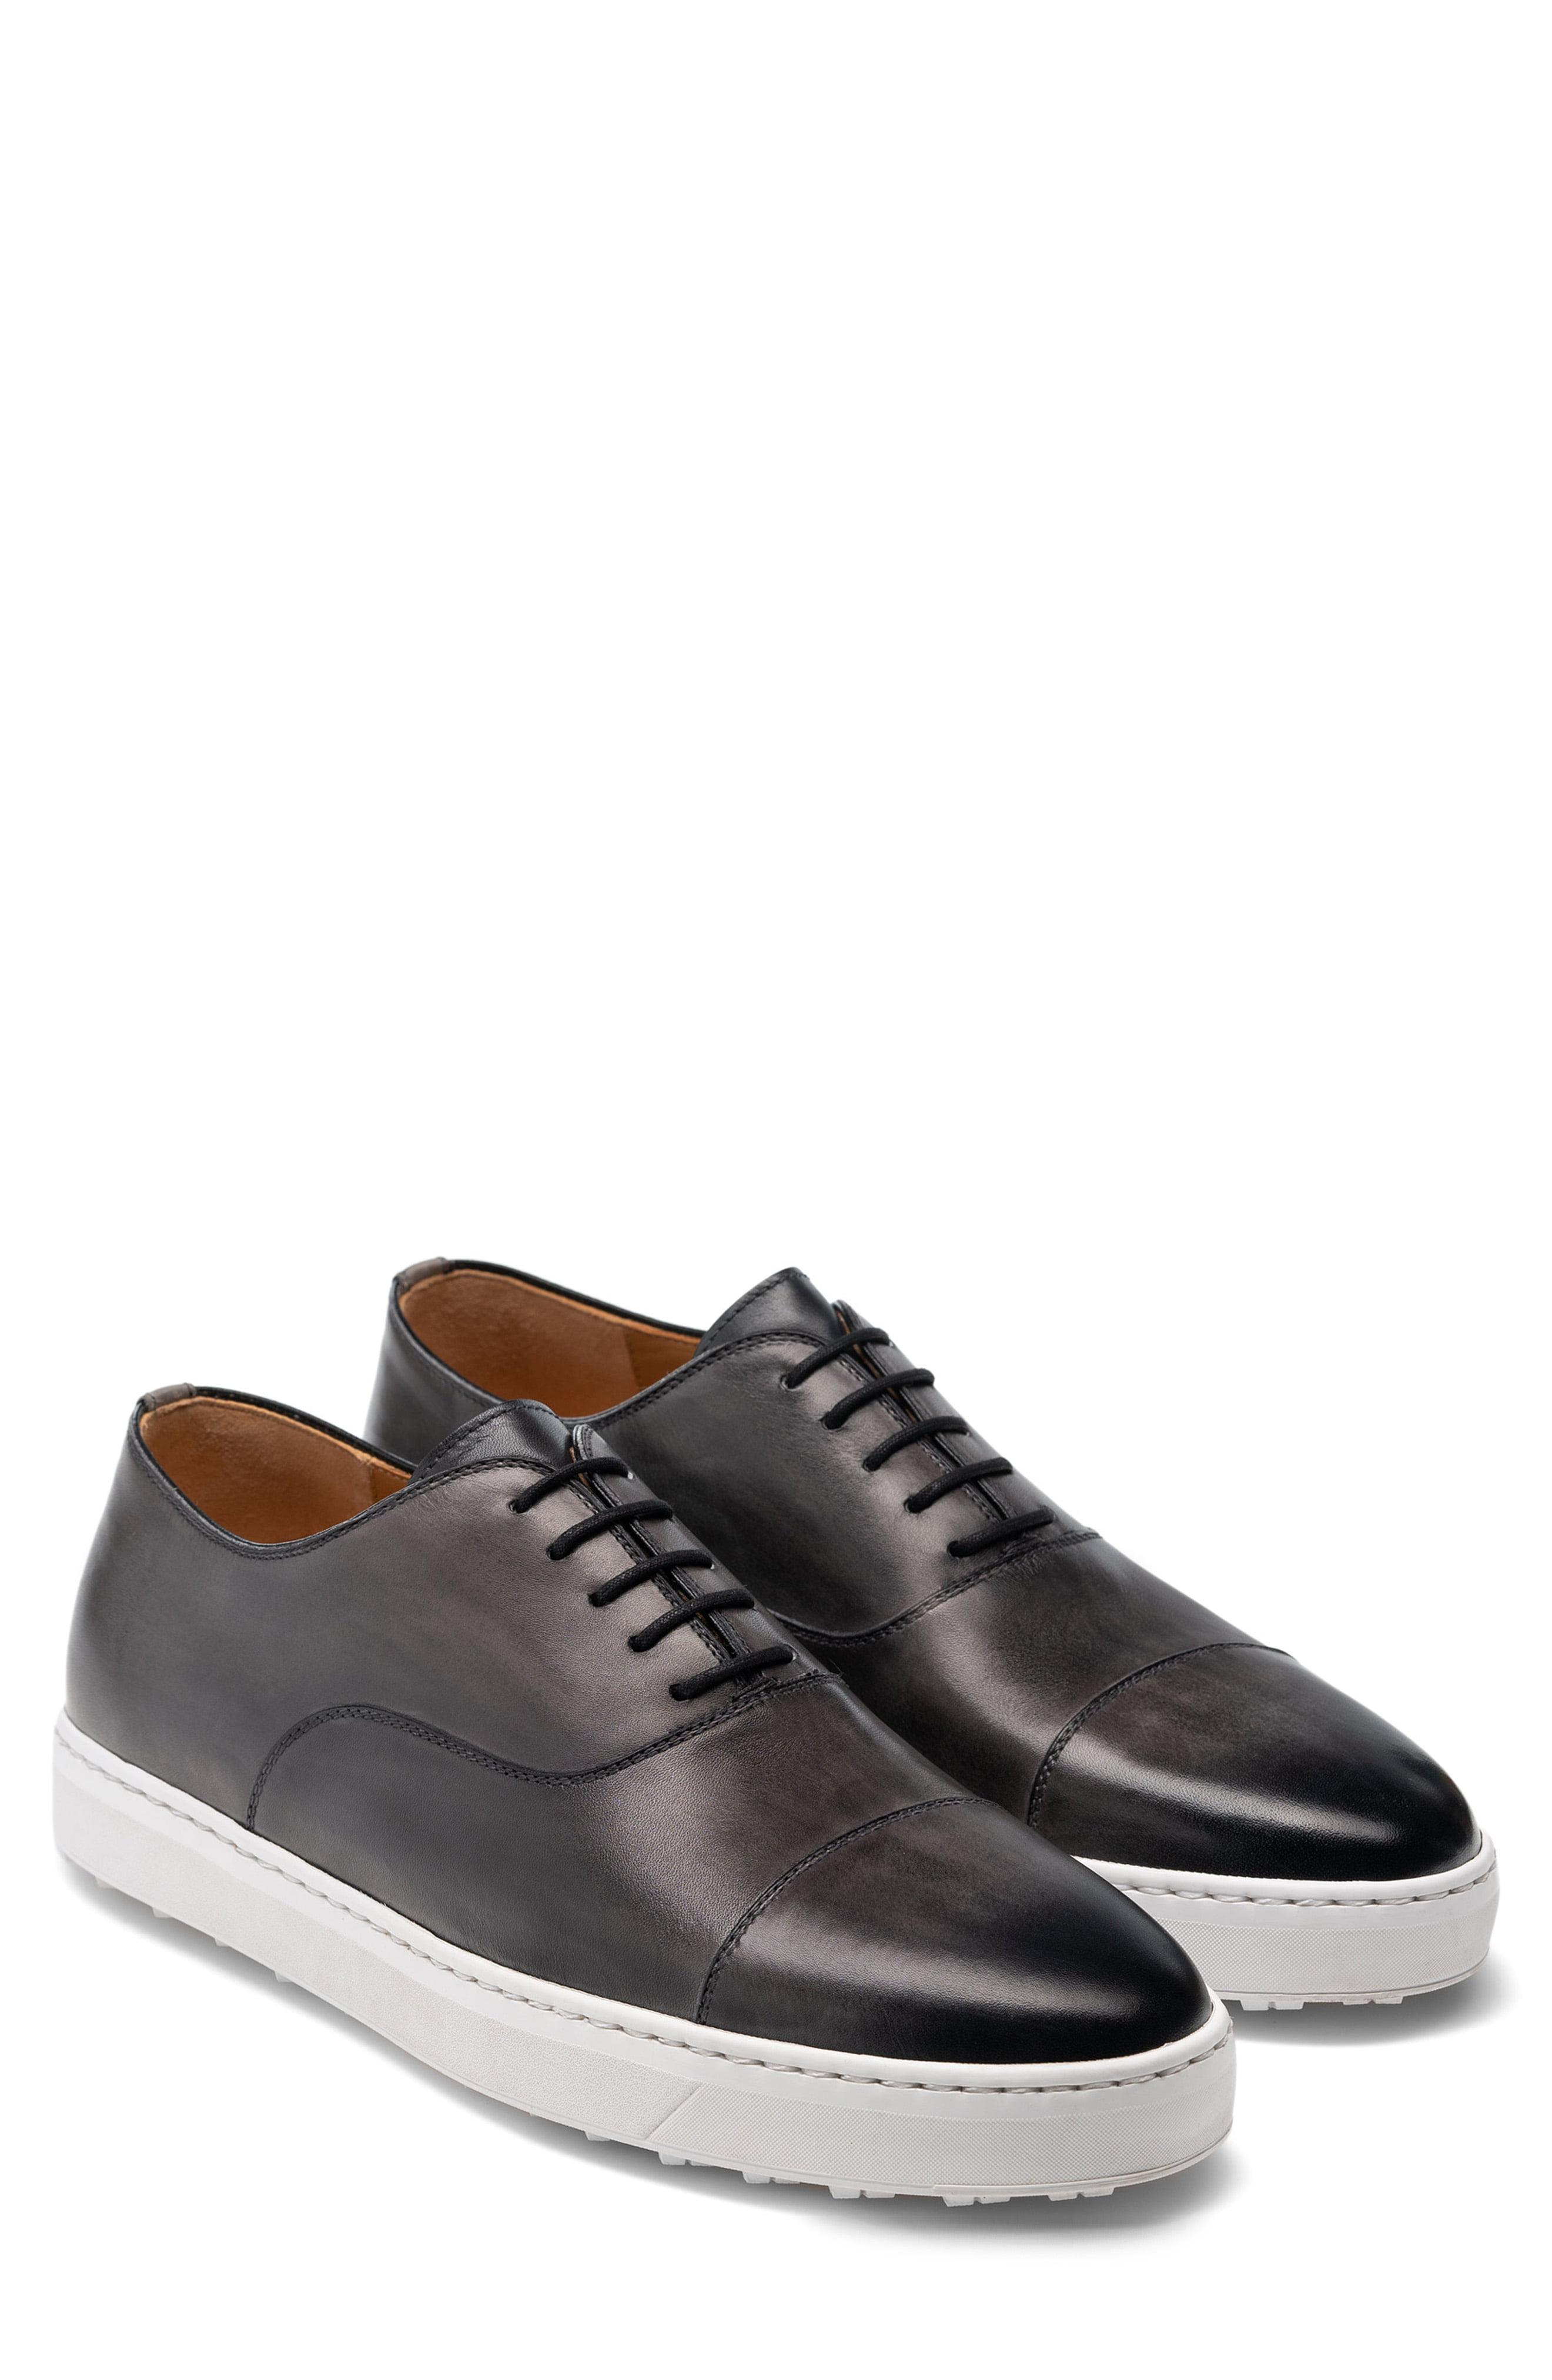 Magnanni Leather Warwick Sneaker in Grey (Gray) for Men - Lyst